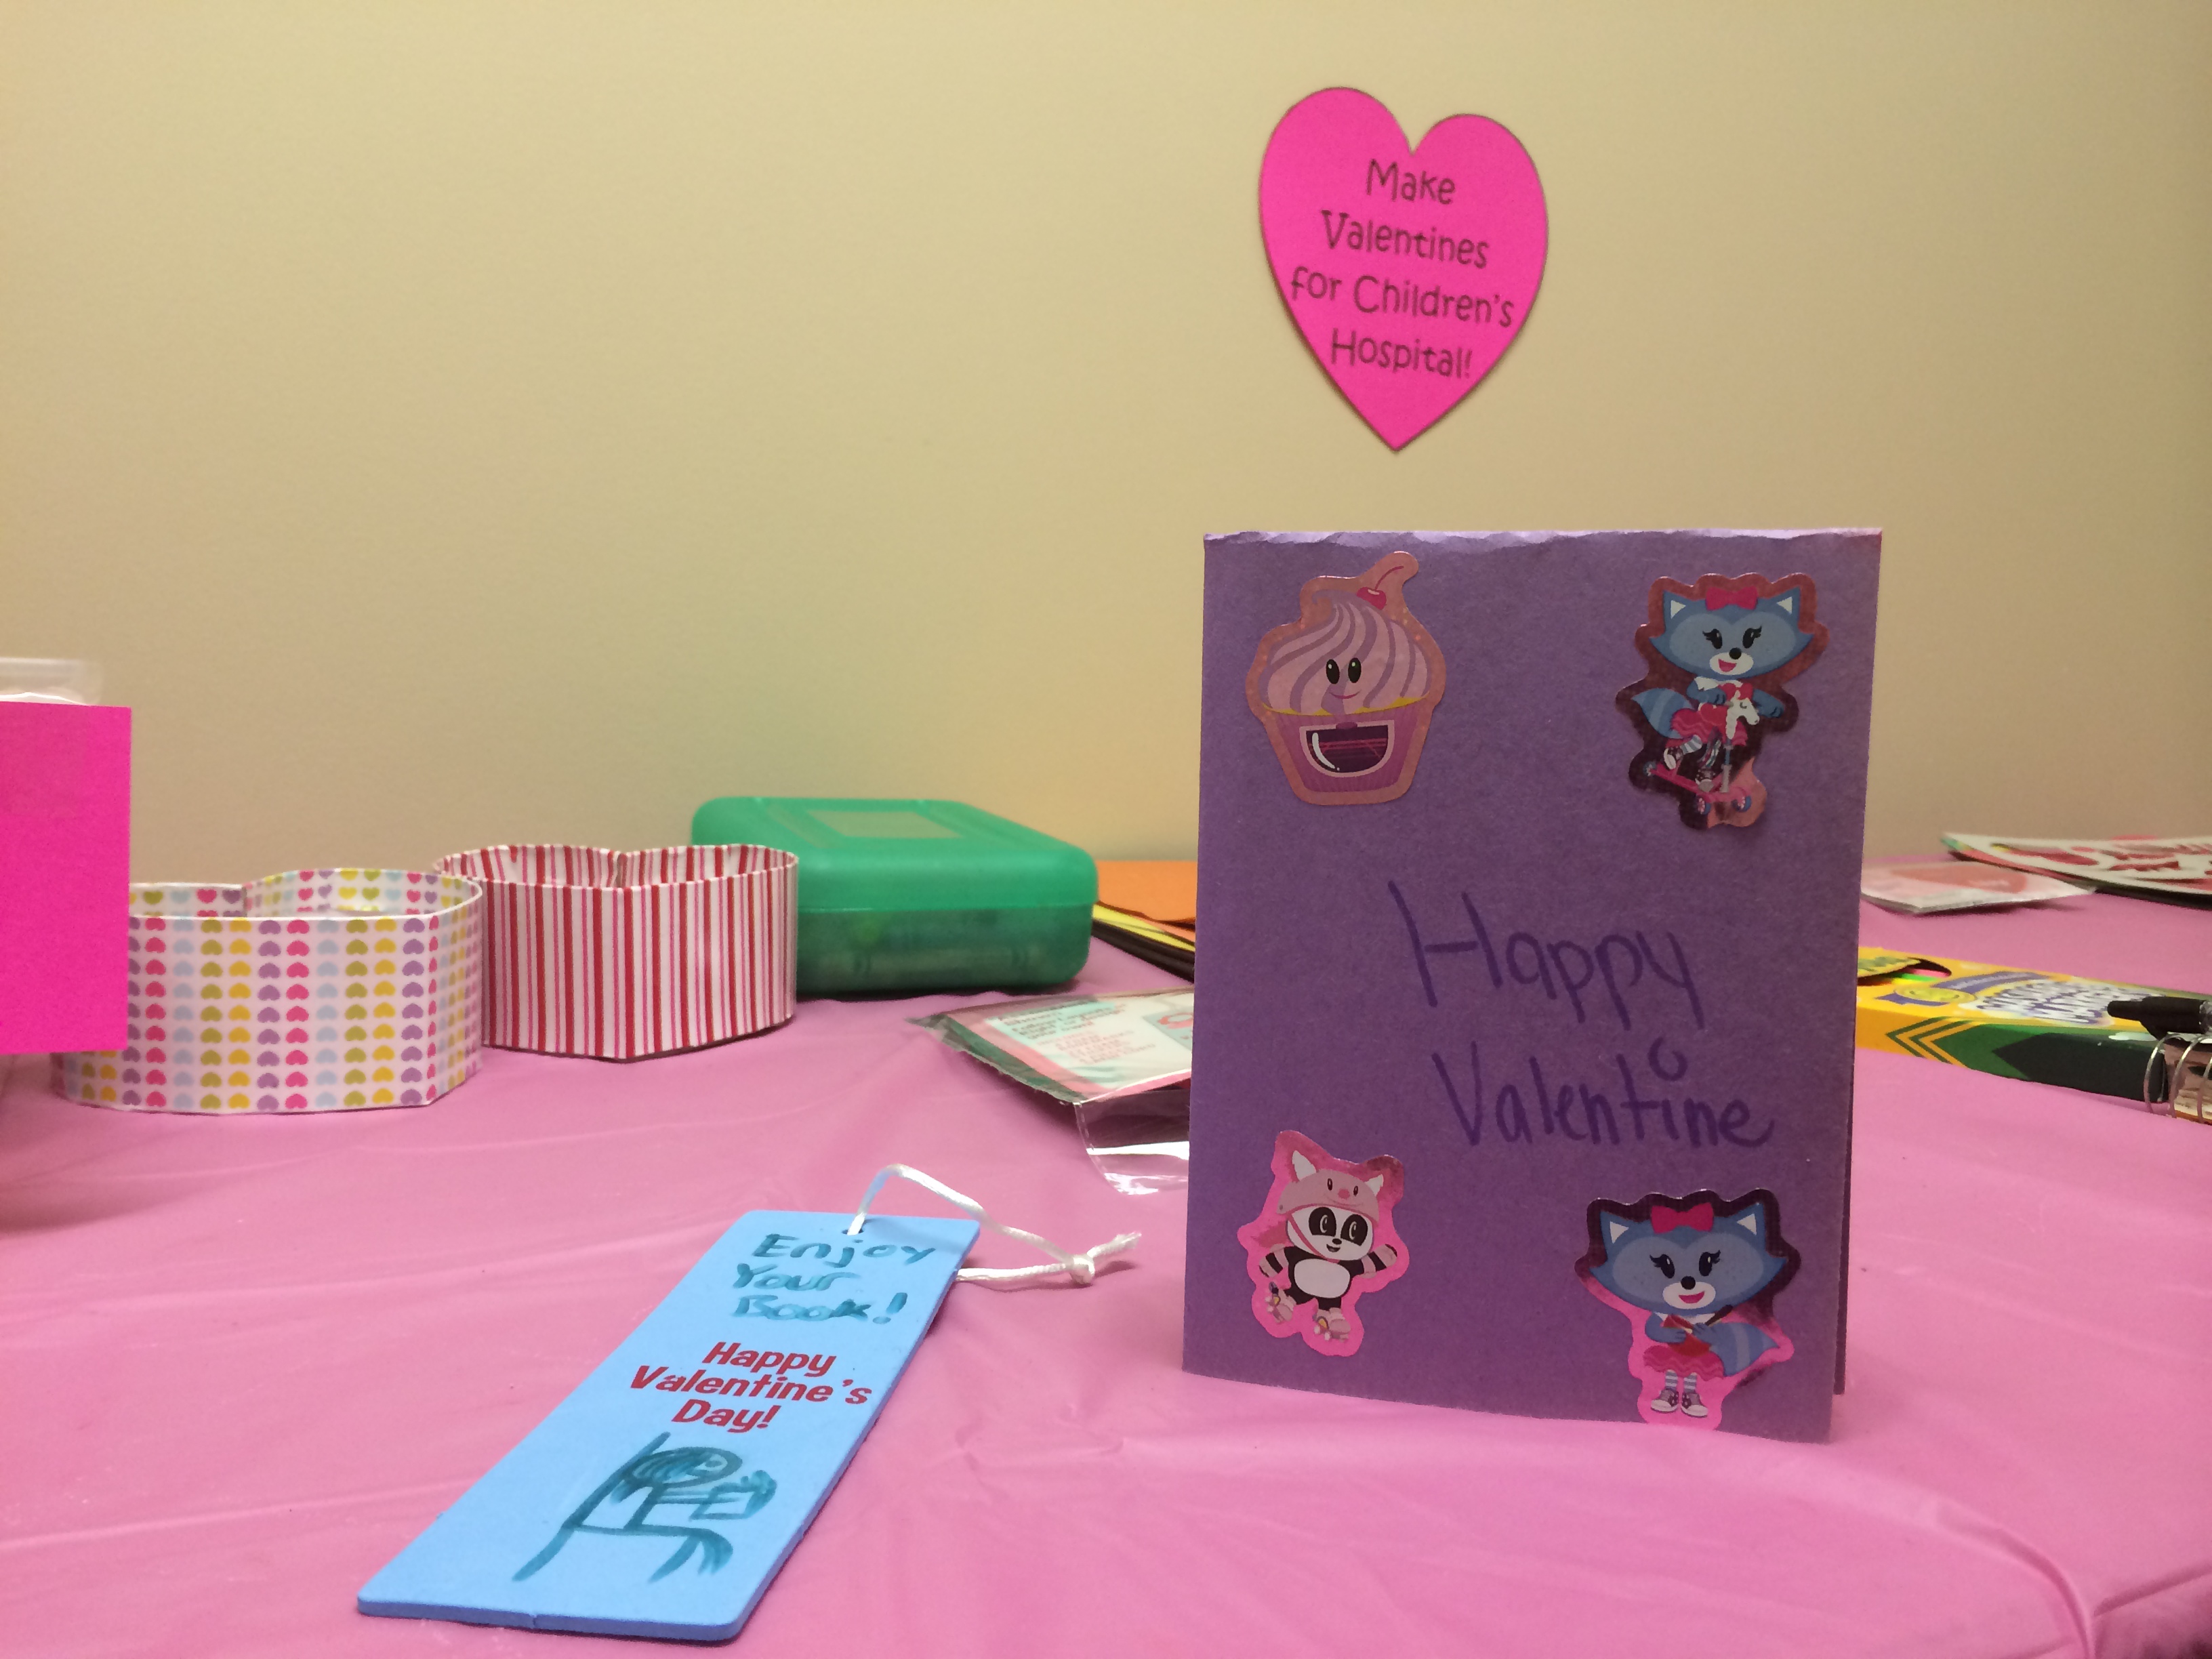 Libraries spread love for Valentine’s Day